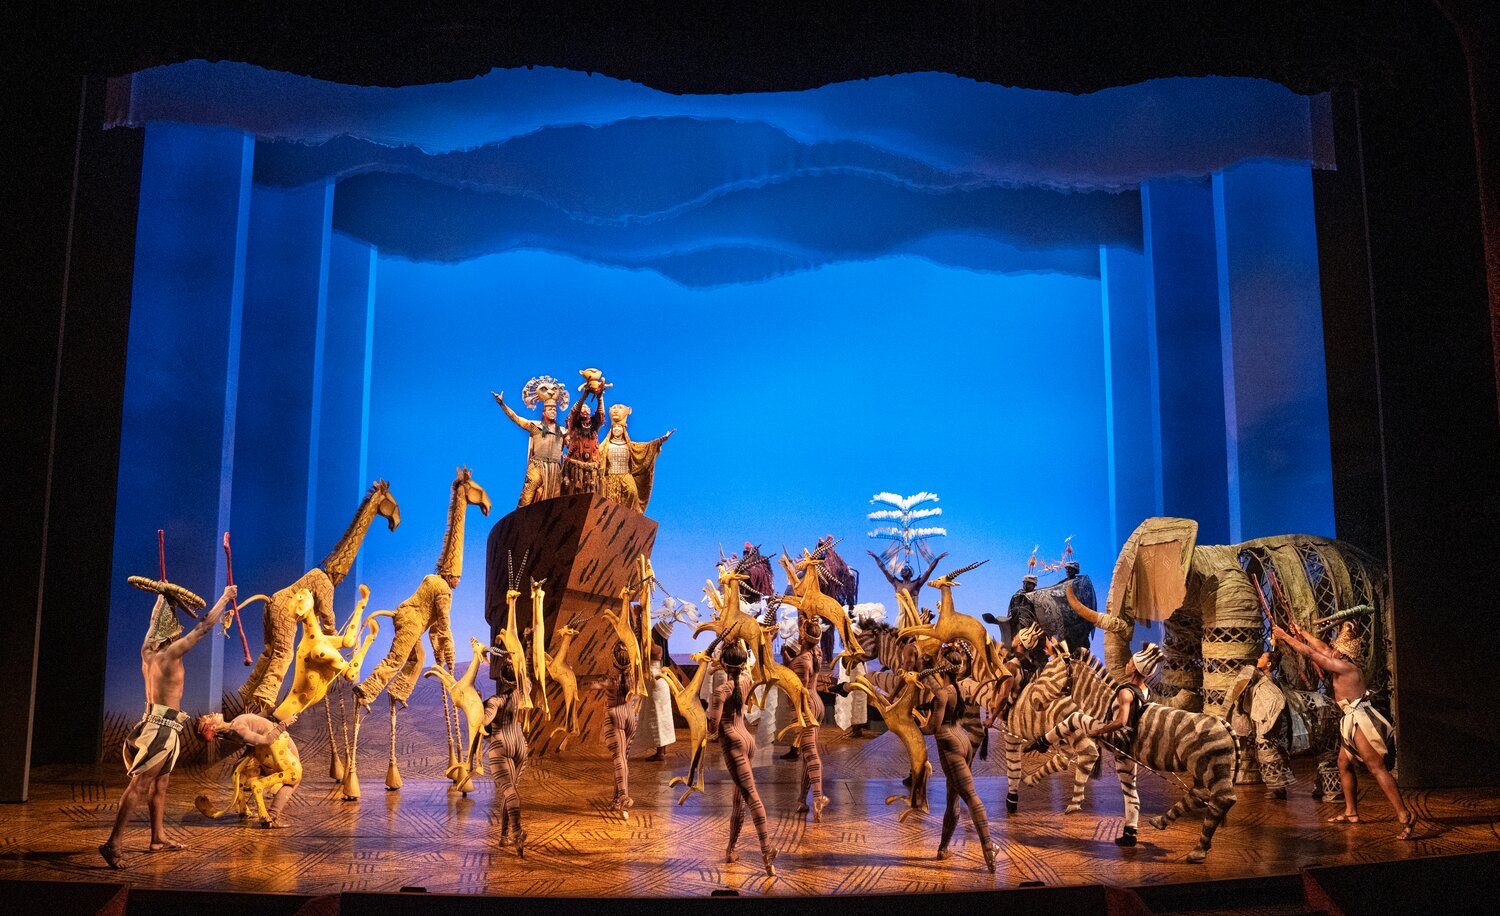 Company of “The Lion King” on Broadway during “Circle of Life.”